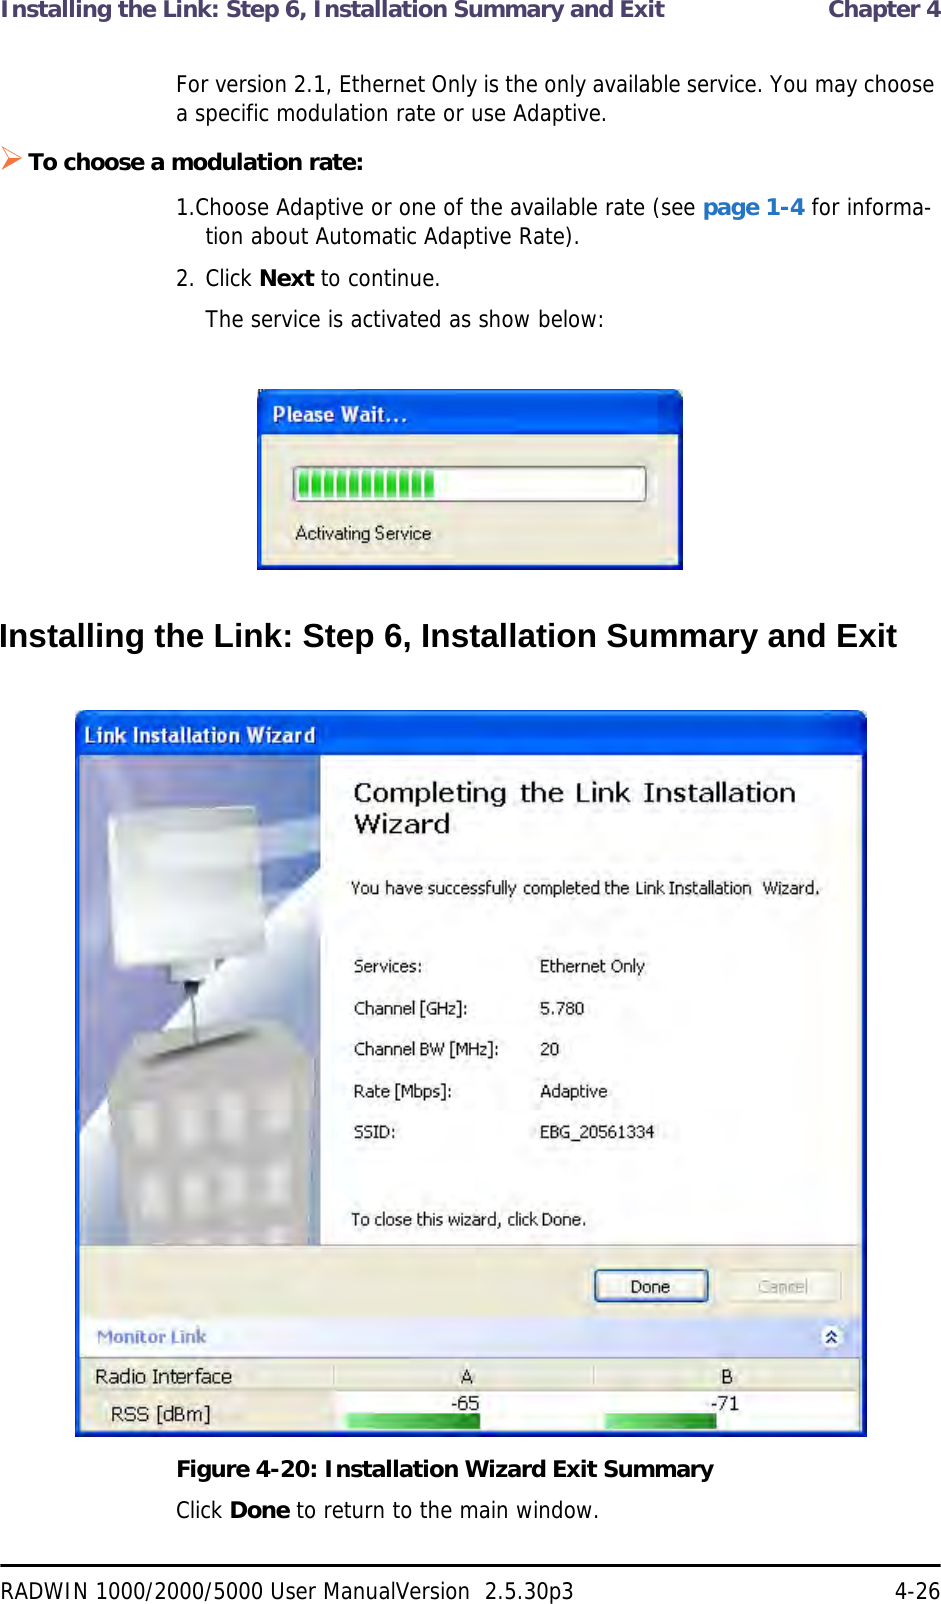 Installing the Link: Step 6, Installation Summary and Exit  Chapter 4RADWIN 1000/2000/5000 User ManualVersion  2.5.30p3 4-26For version 2.1, Ethernet Only is the only available service. You may choose a specific modulation rate or use Adaptive.To choose a modulation rate:1.Choose Adaptive or one of the available rate (see page 1-4 for informa-tion about Automatic Adaptive Rate).2. Click Next to continue.The service is activated as show below:Installing the Link: Step 6, Installation Summary and ExitFigure 4-20: Installation Wizard Exit Summary Click Done to return to the main window.